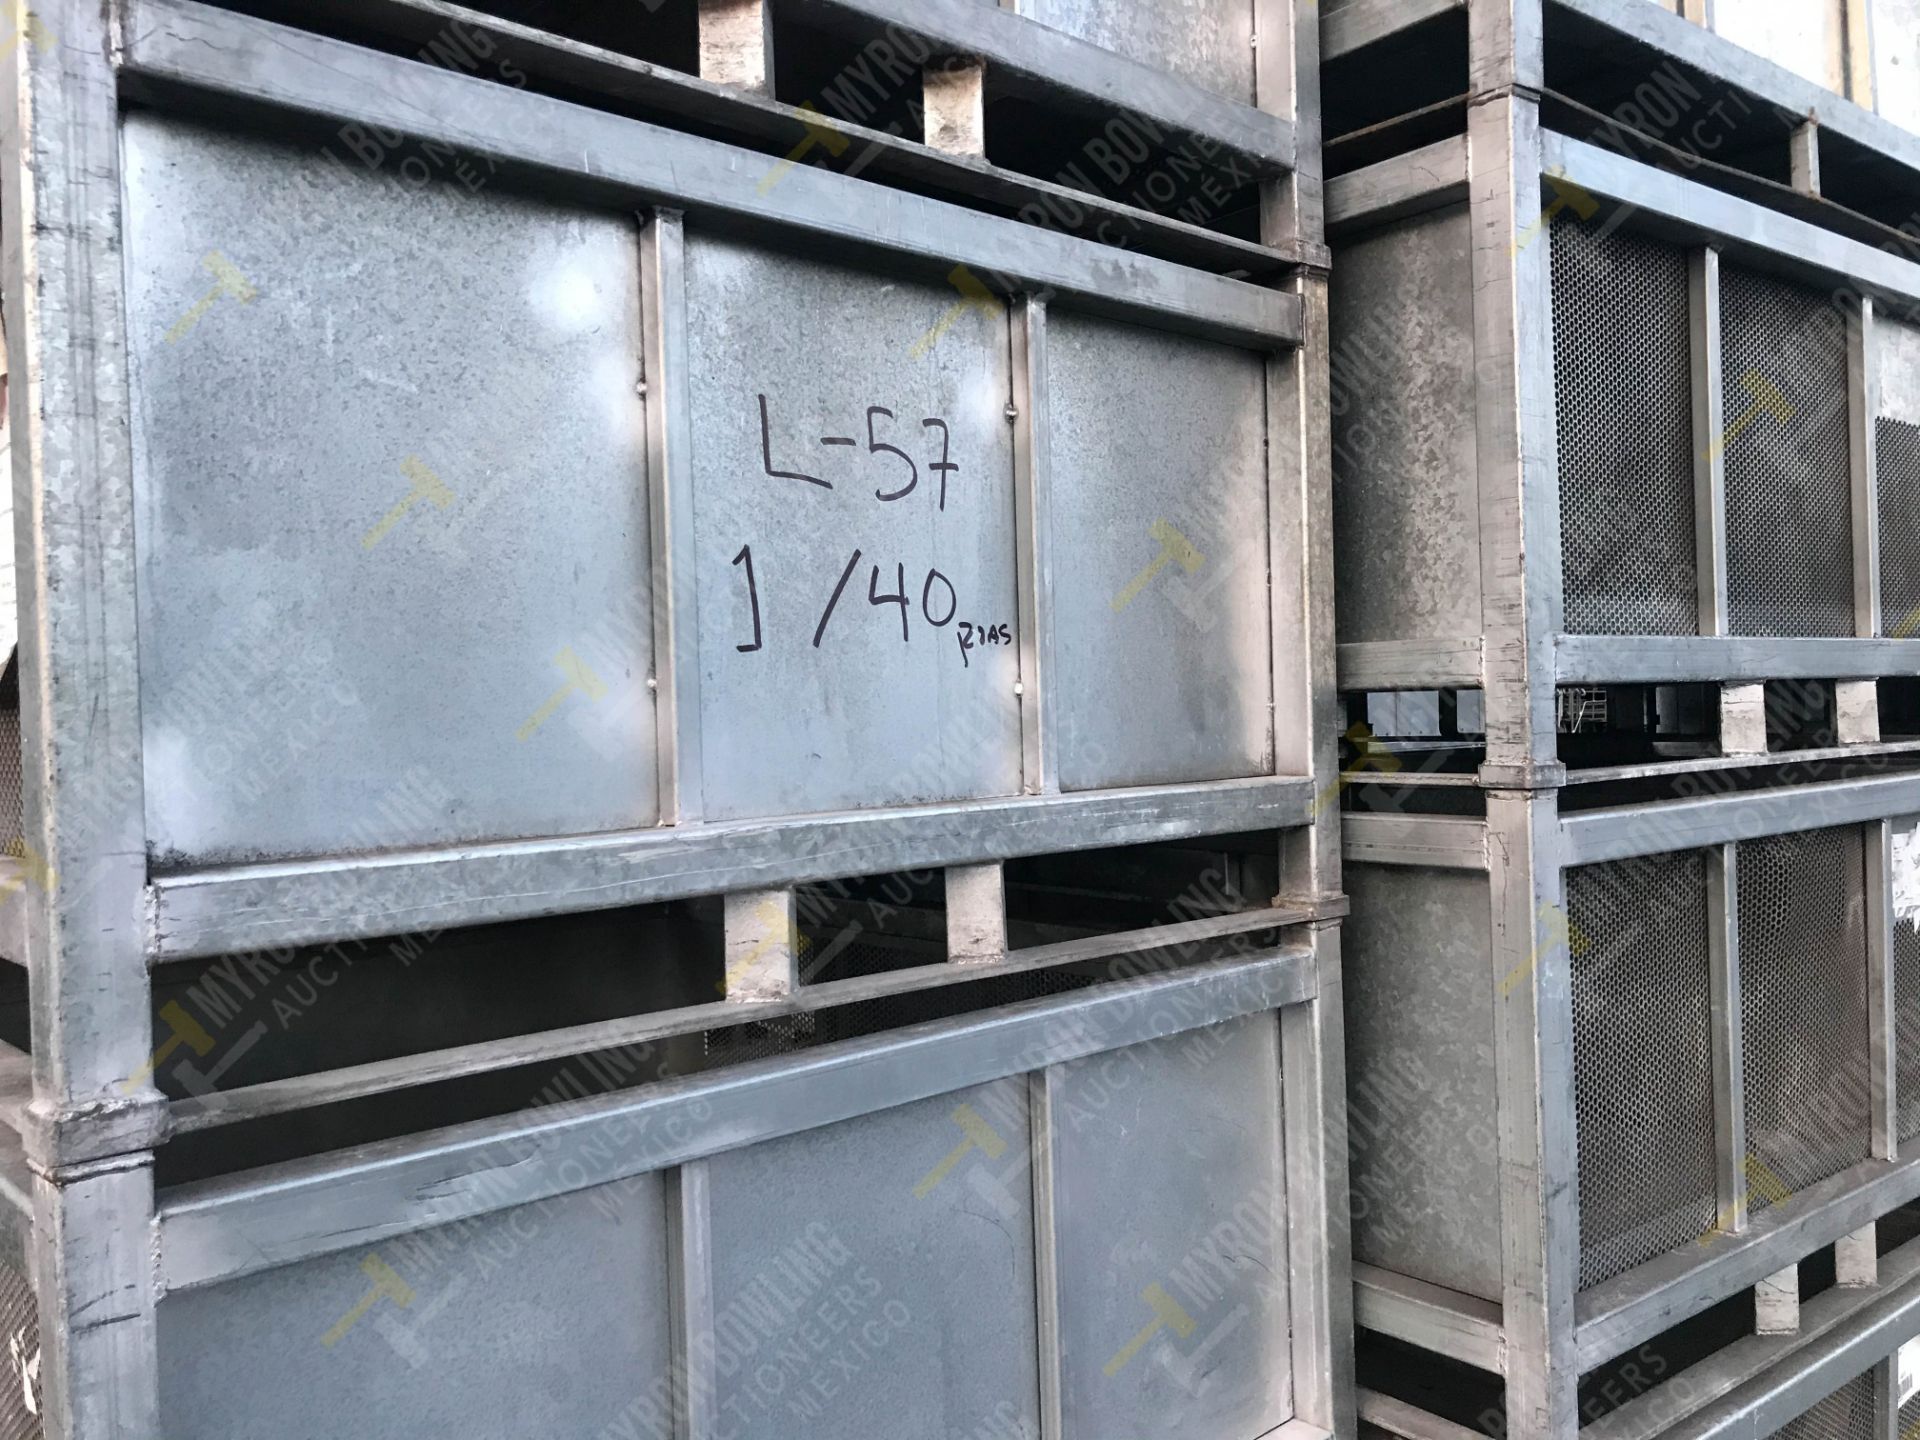 70 GALVANIZED STEEL CONTAINERS XYTEC (DIMENSIONS 0.60x1.32x1.24 METERS) - Image 6 of 8